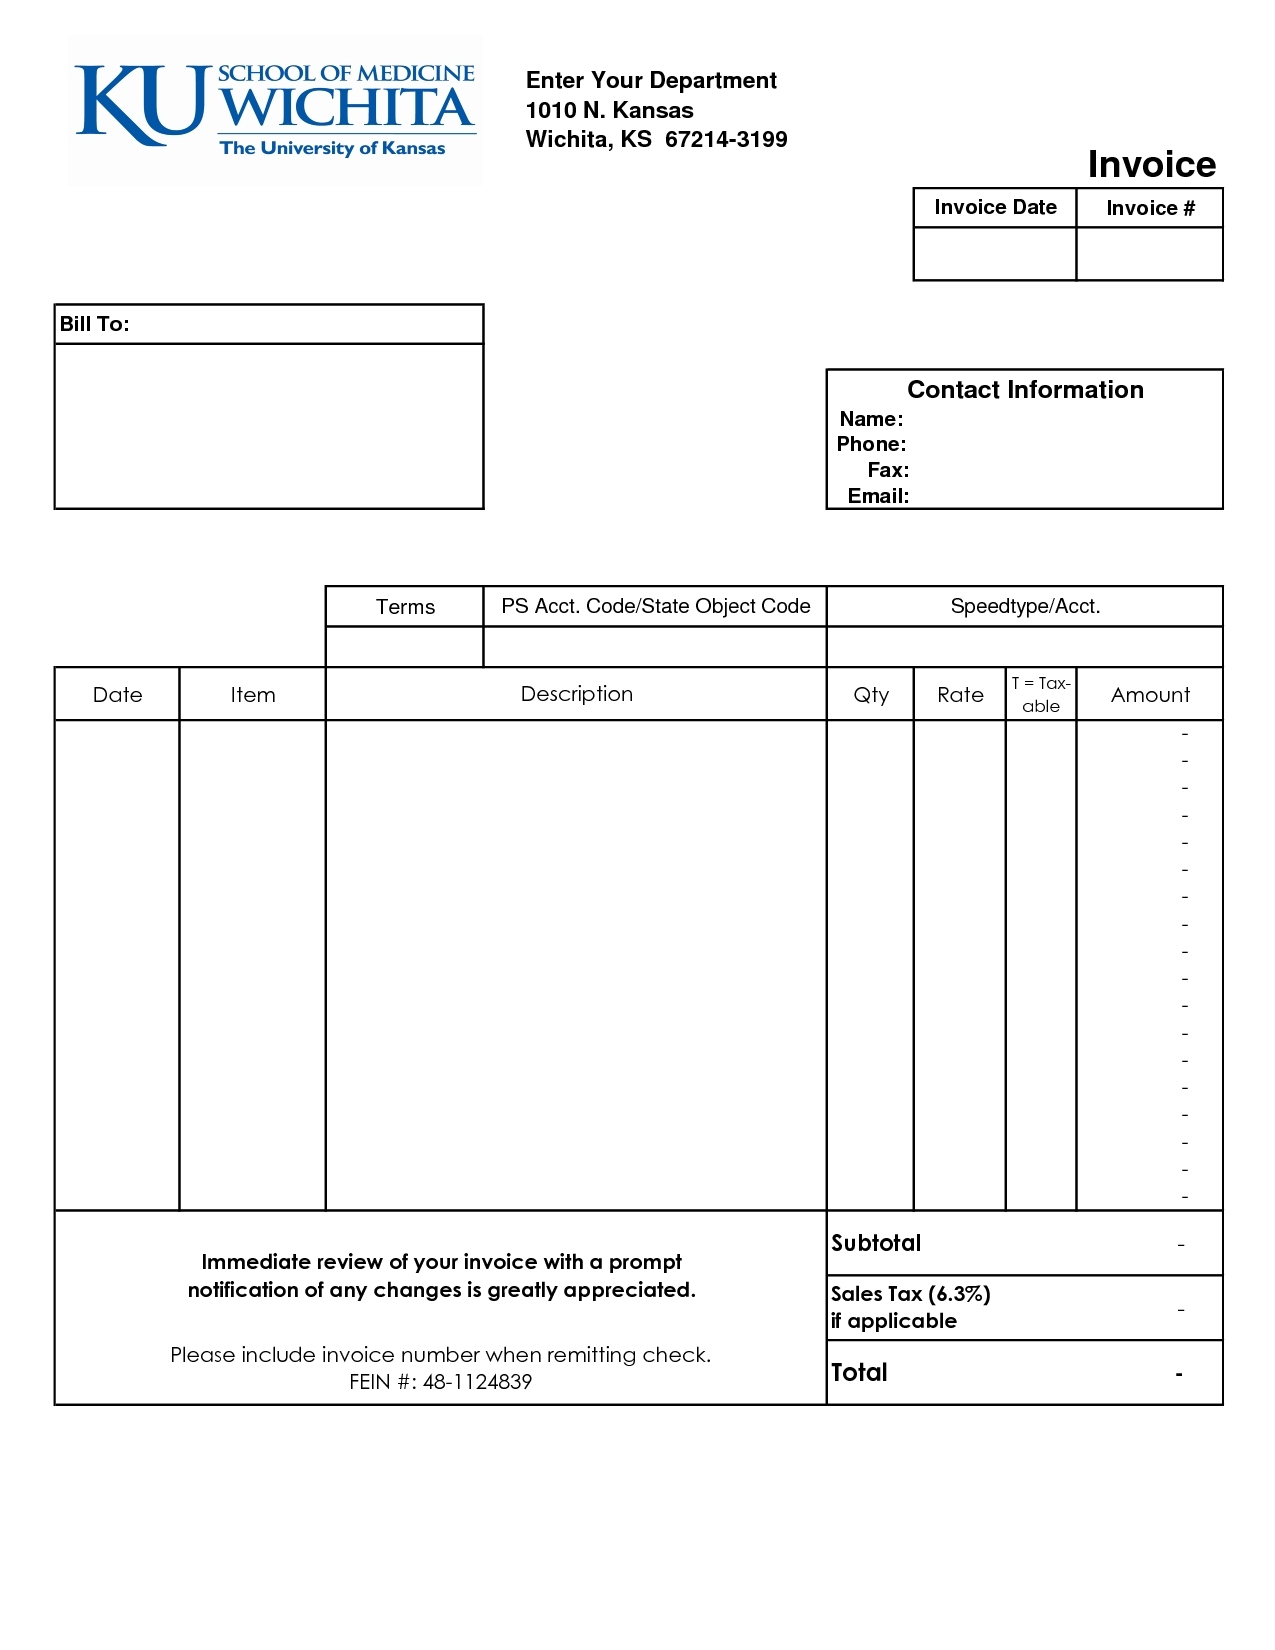 Billing Invoice Sample Bill Format Template Templat Latest intended for